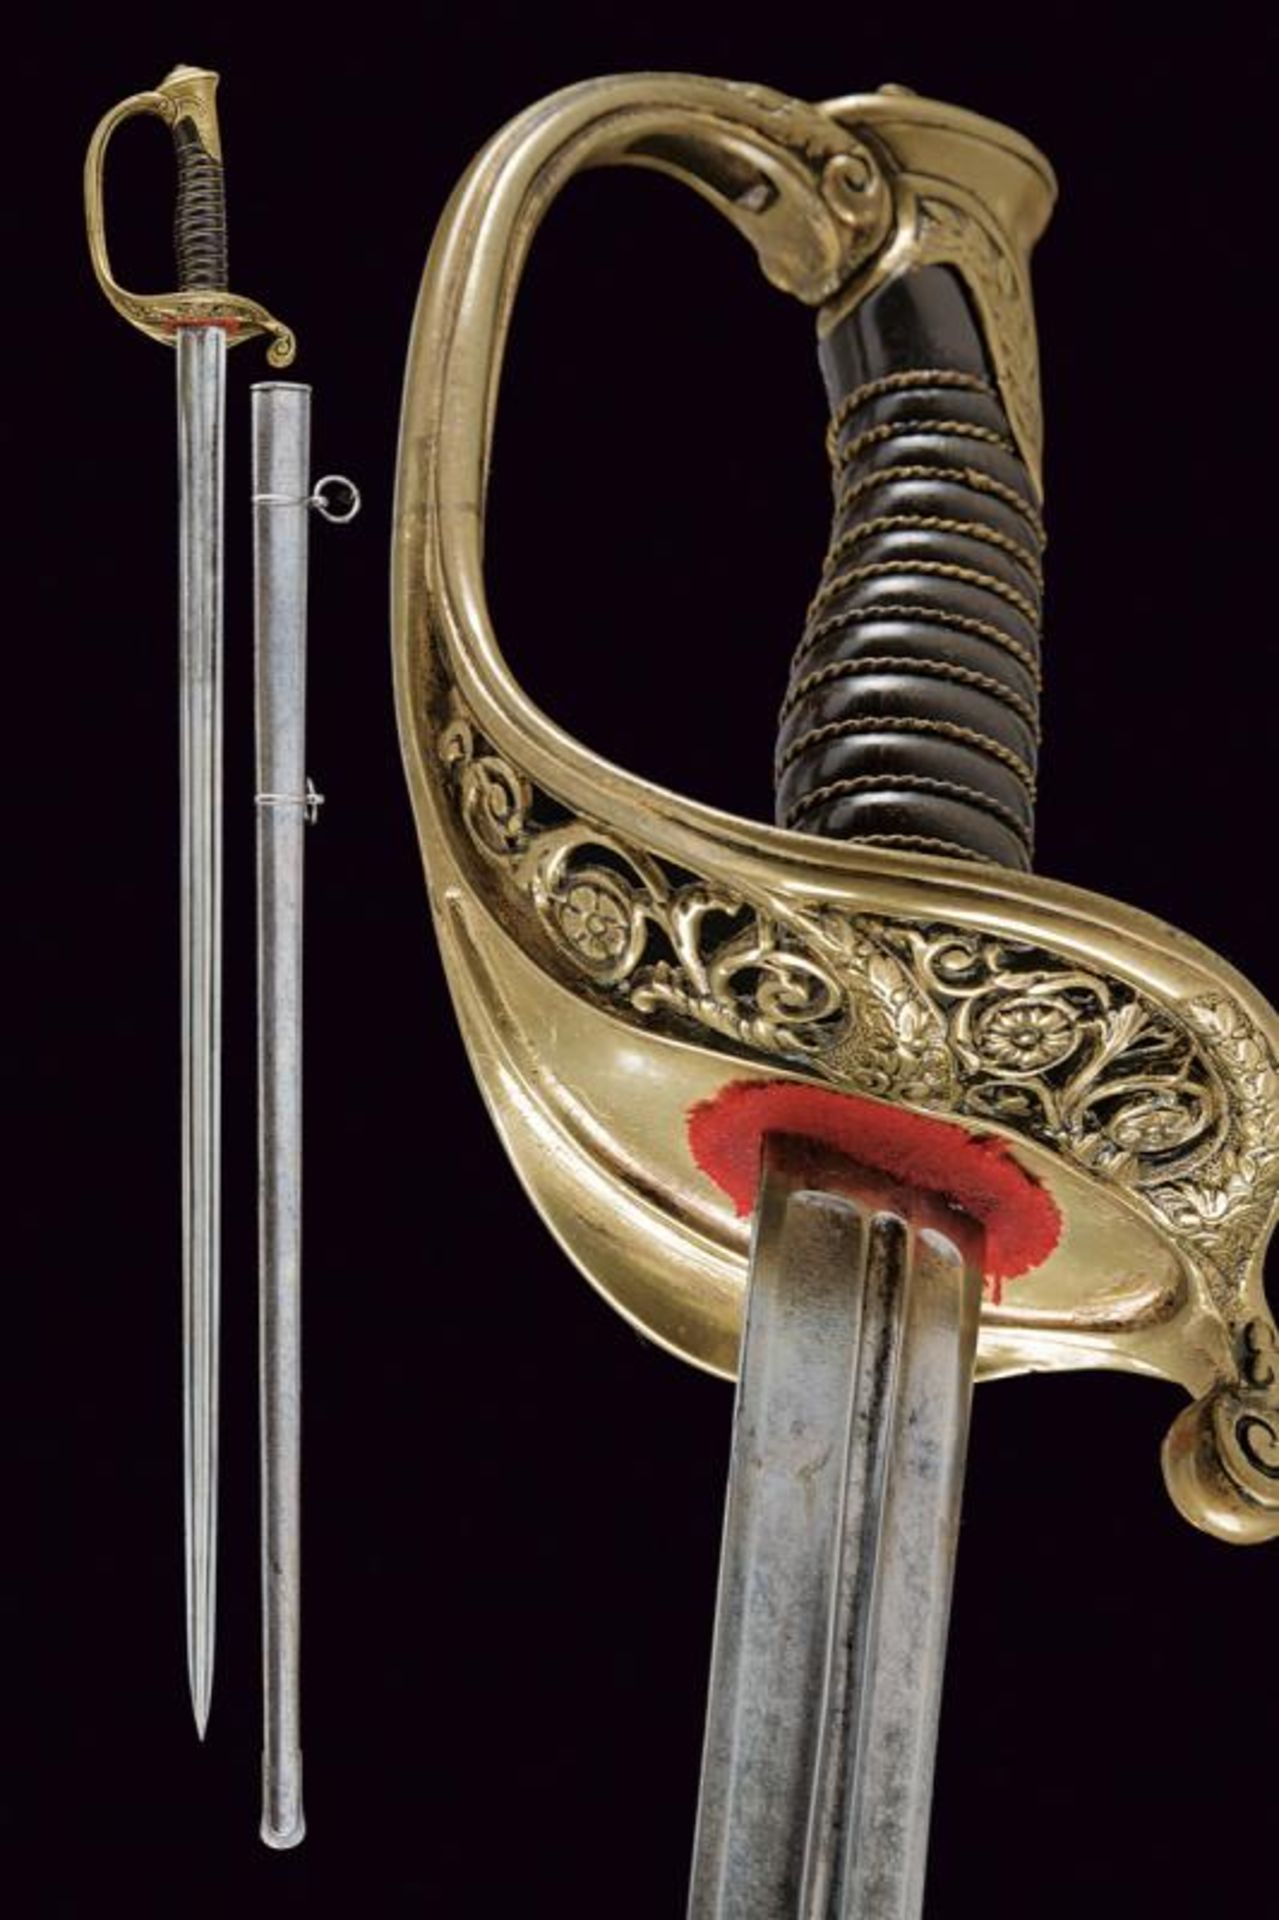 A French-style infantry officer's sword